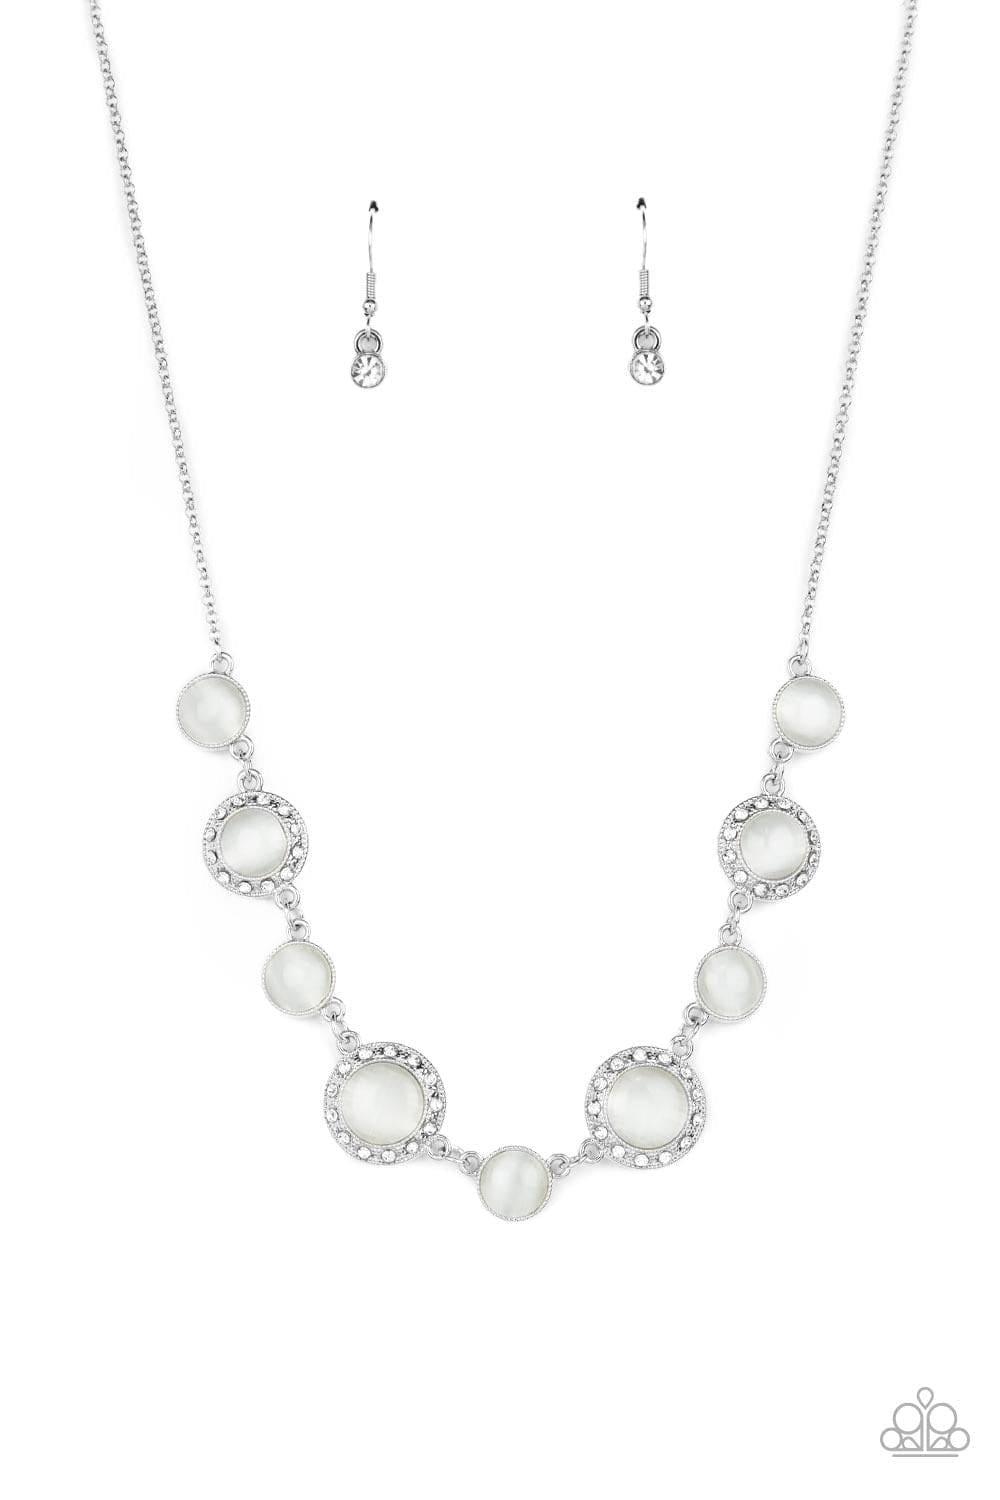 Paparazzi Accessories - Too Good To Beam True - White Necklace - Bling by JessieK